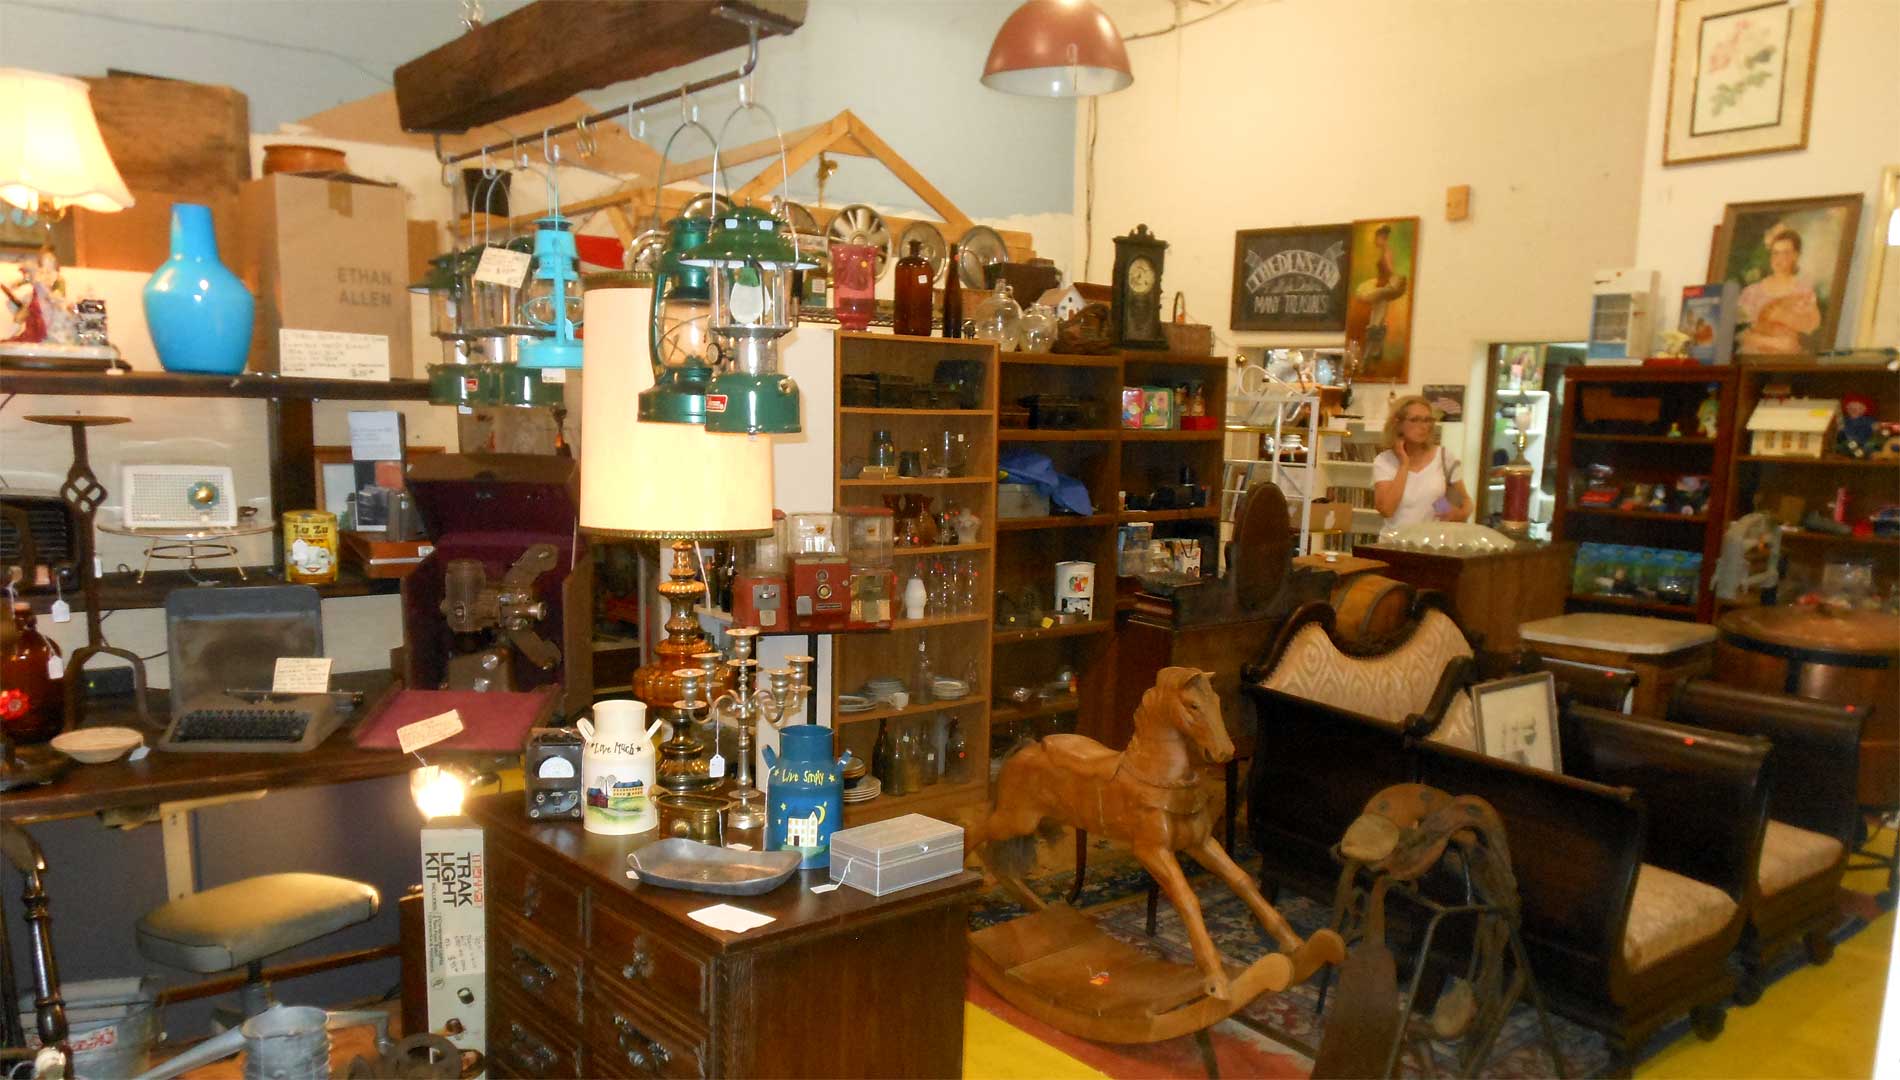 Folk art pieces, furniture, collectibles, so much more